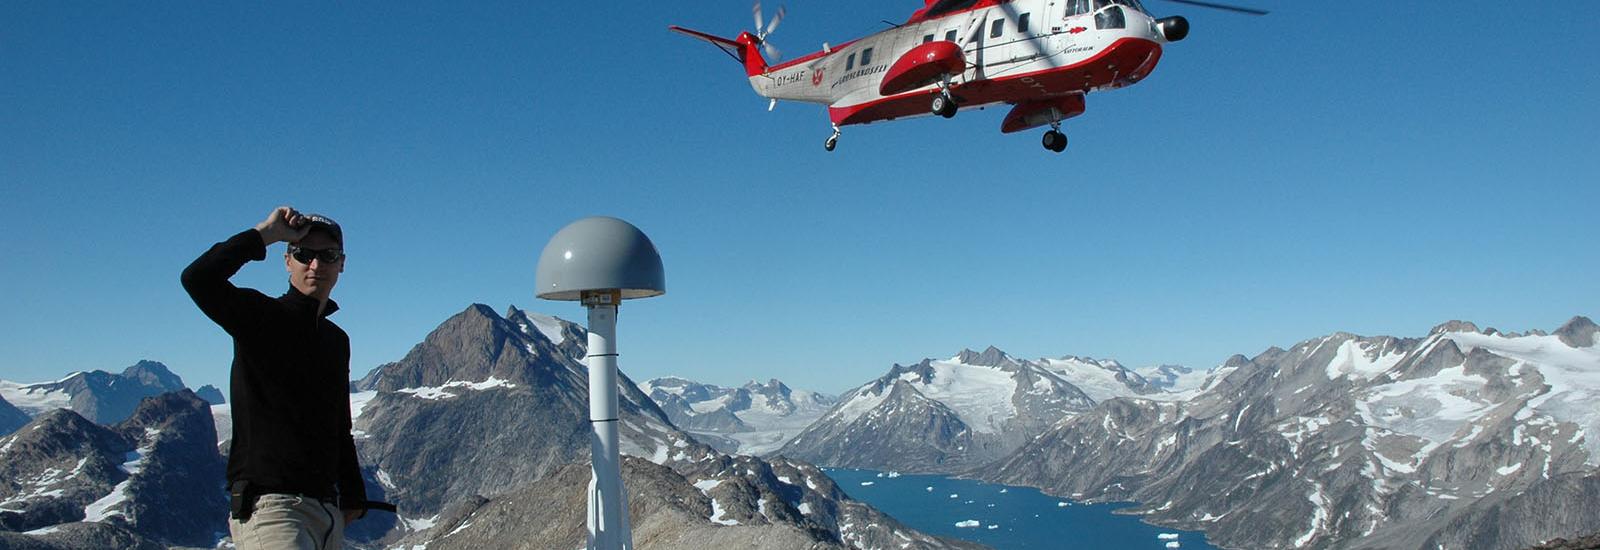 Student next to helicopter on mountain